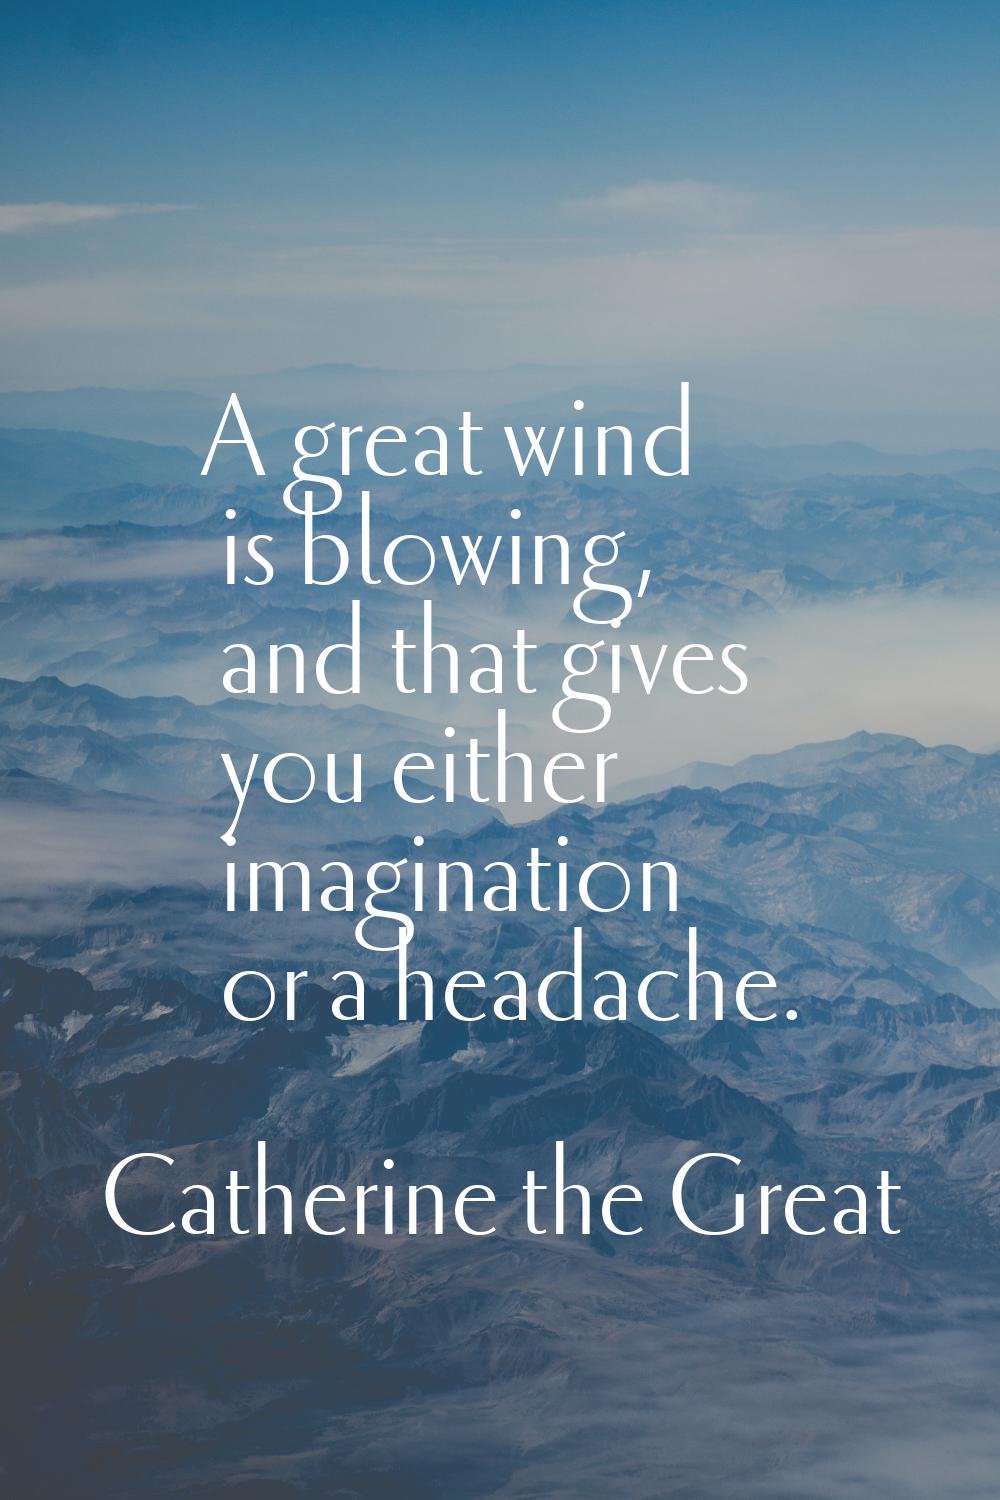 A great wind is blowing, and that gives you either imagination or a headache.